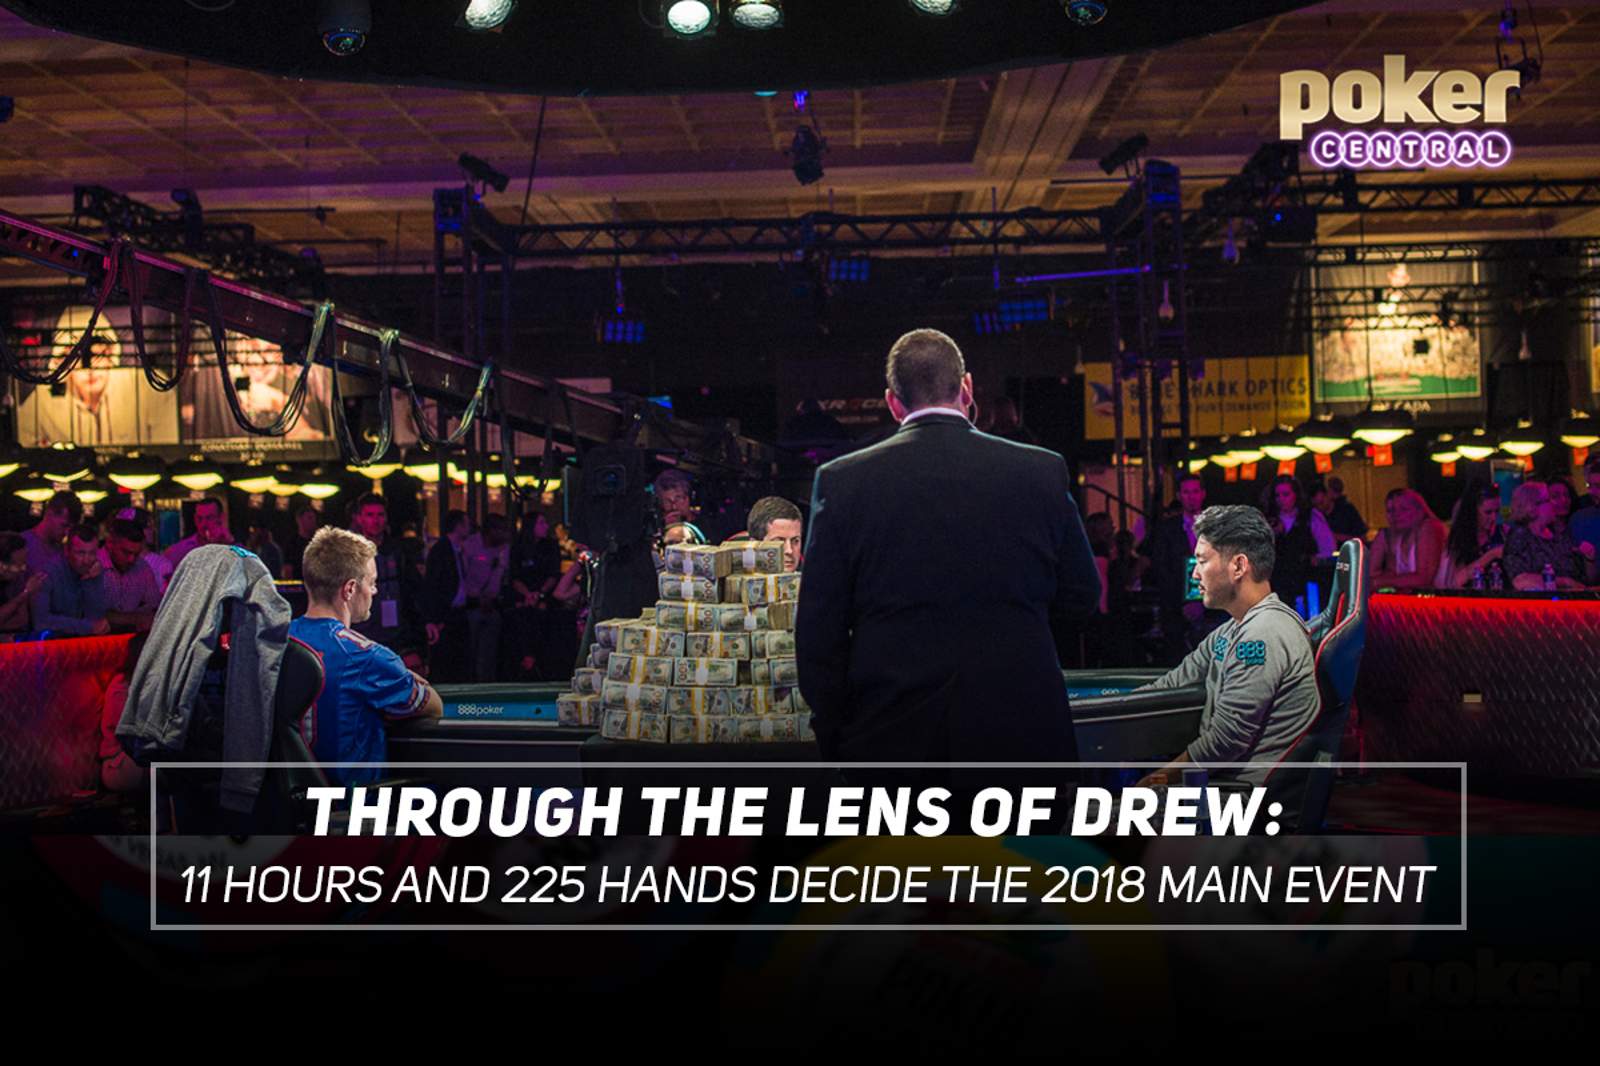 Through The Lens of Drew - 11 Hours and 225 Hands Decide the 2018 Main Event